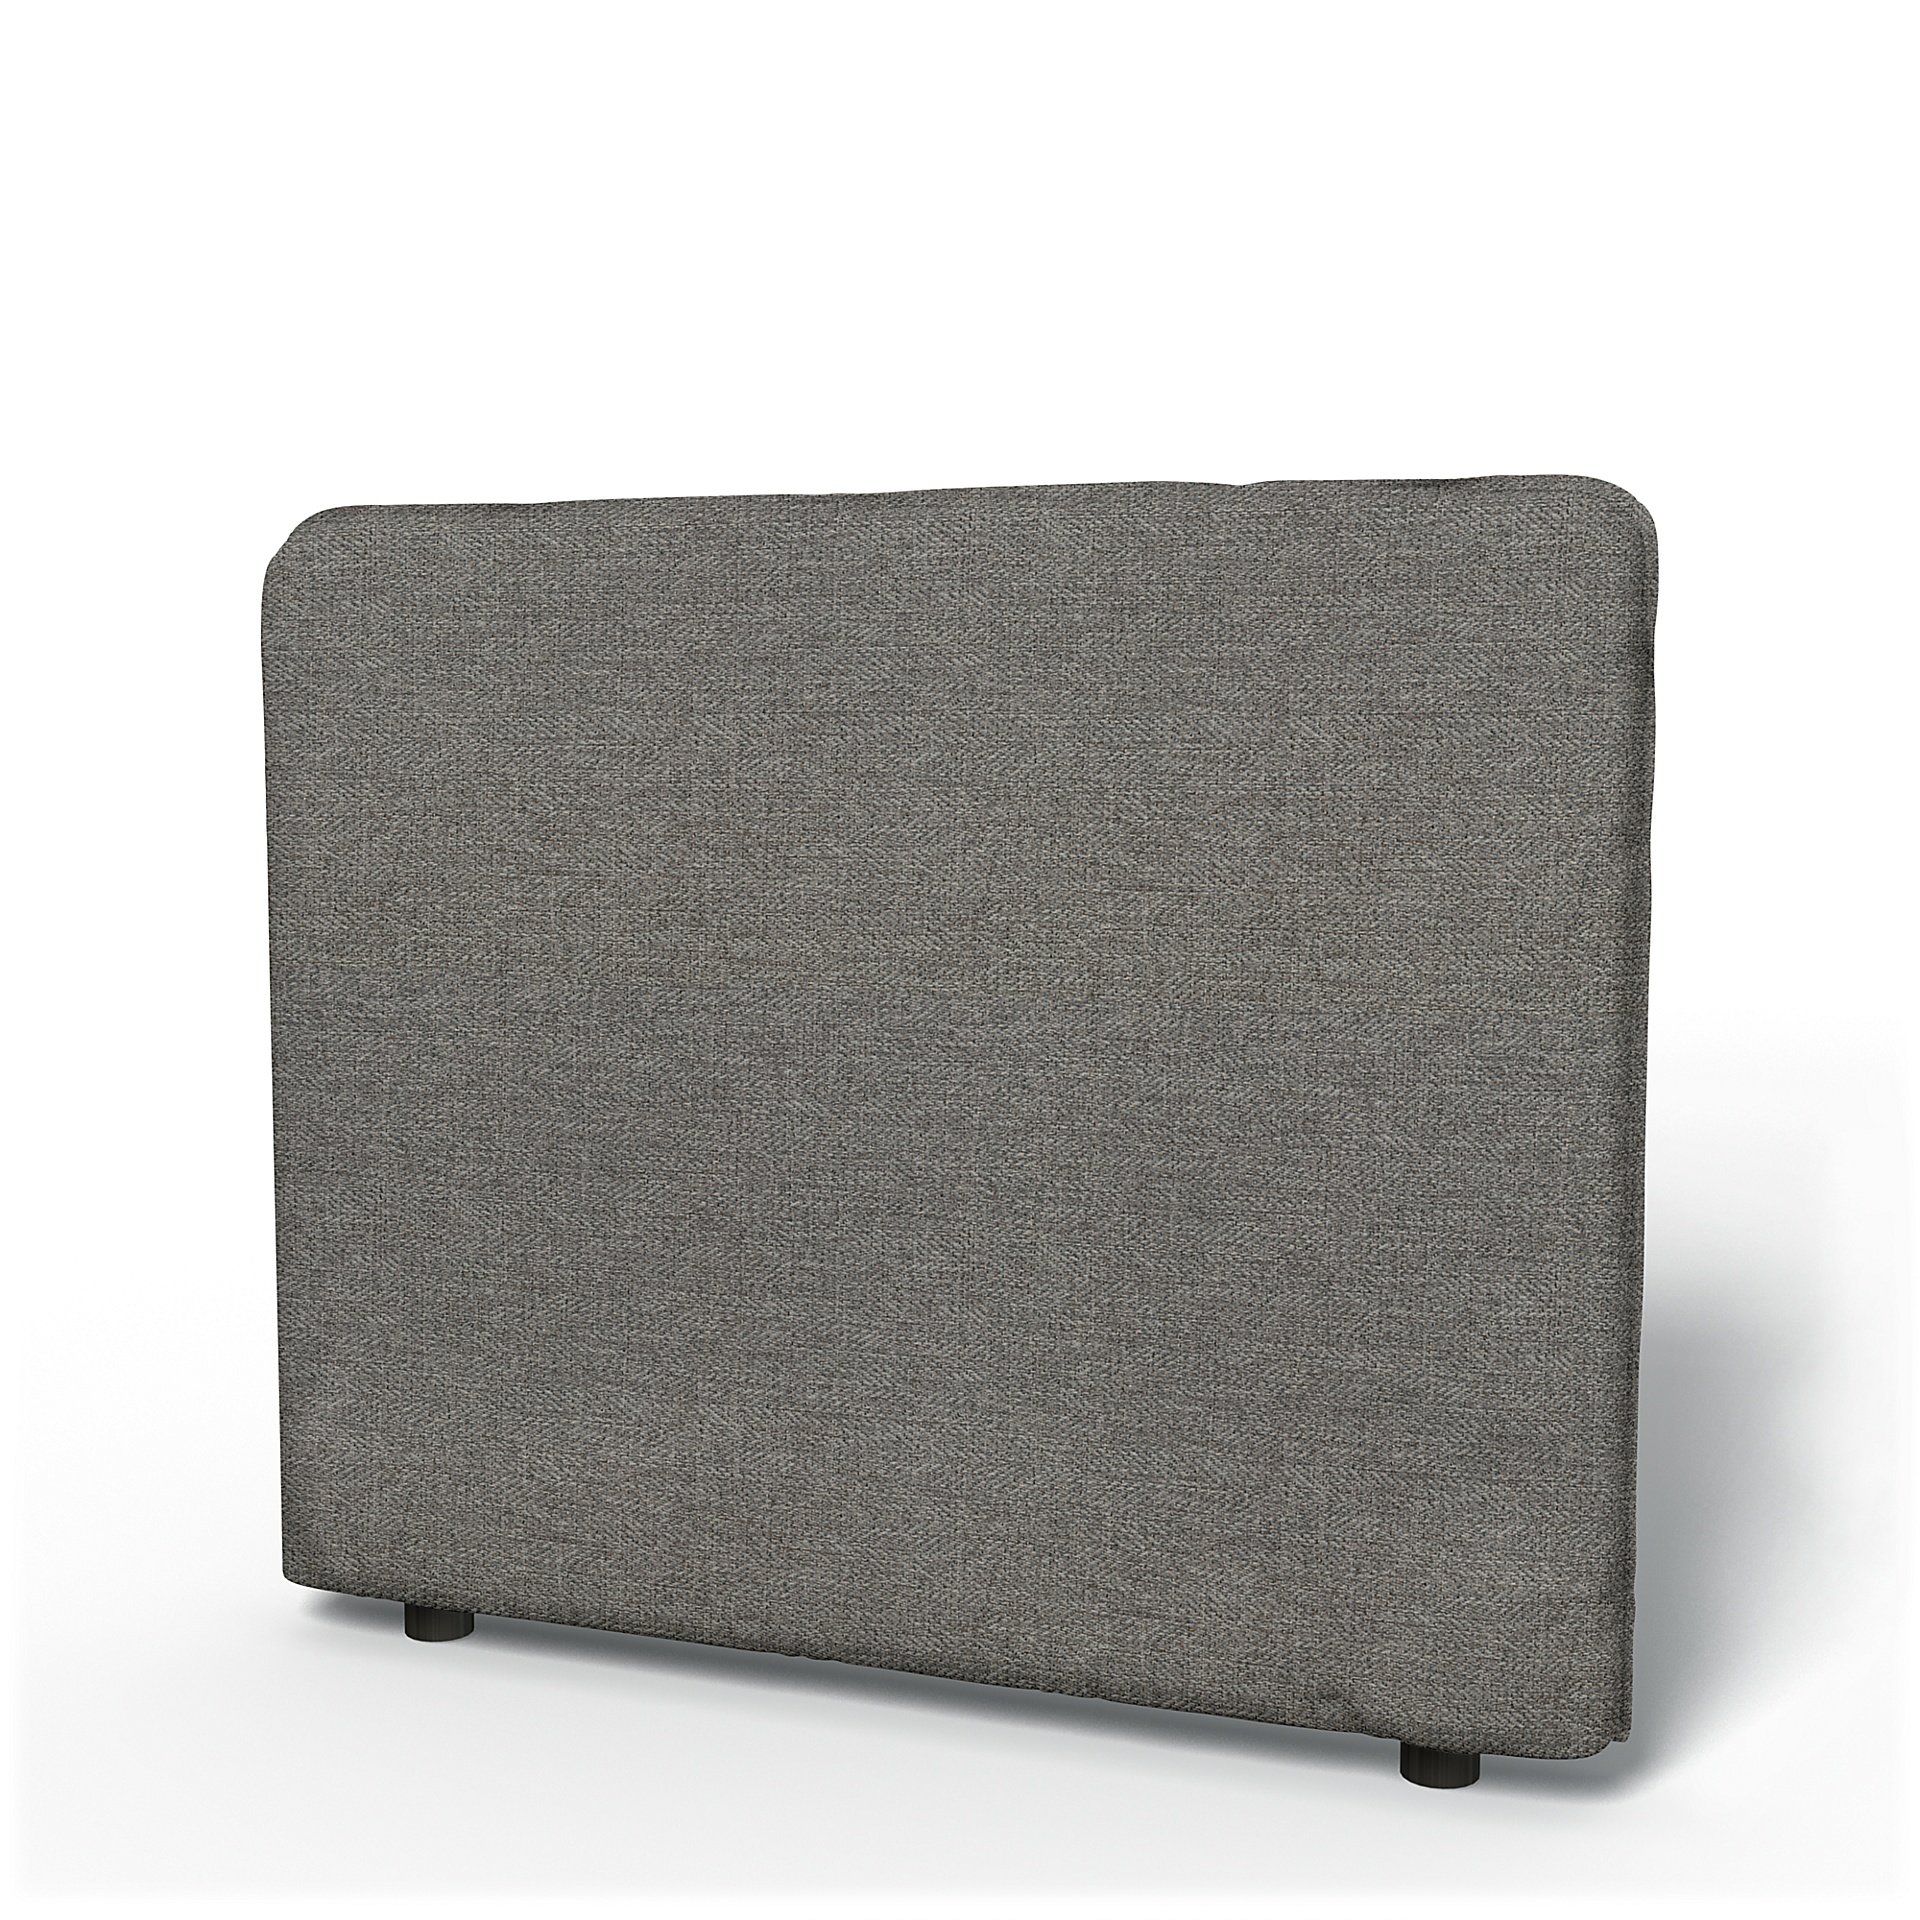 IKEA - Vallentuna Low Backrest Cover 100x80cm 39x32in, Taupe, Boucle & Texture - Bemz